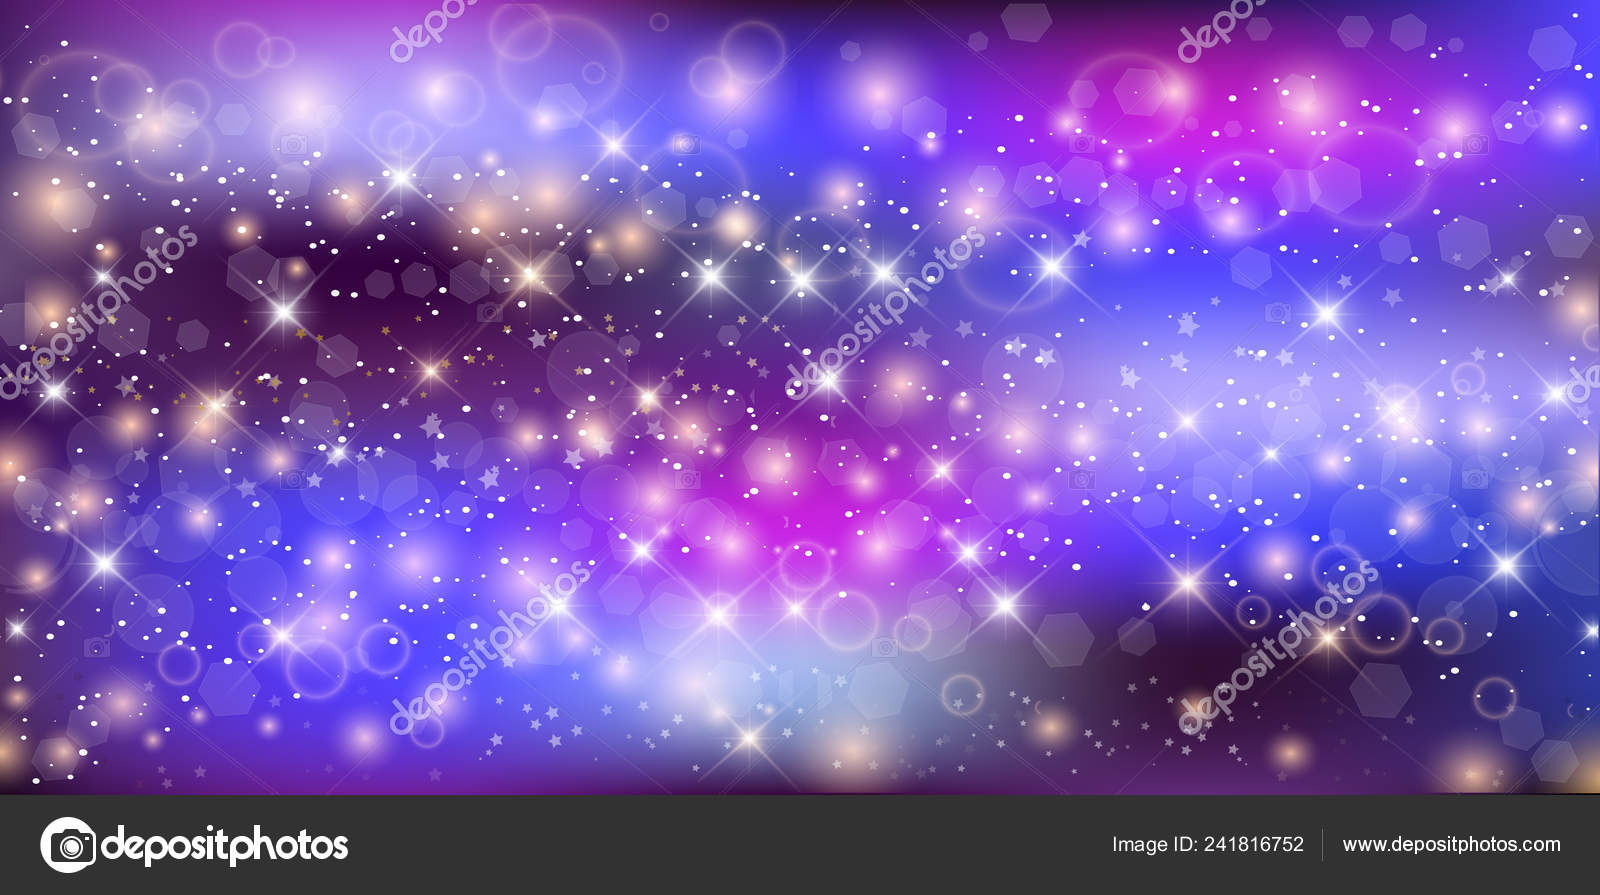 Fantastic Galaxy Rectangle Background Blurred Glowing Circles